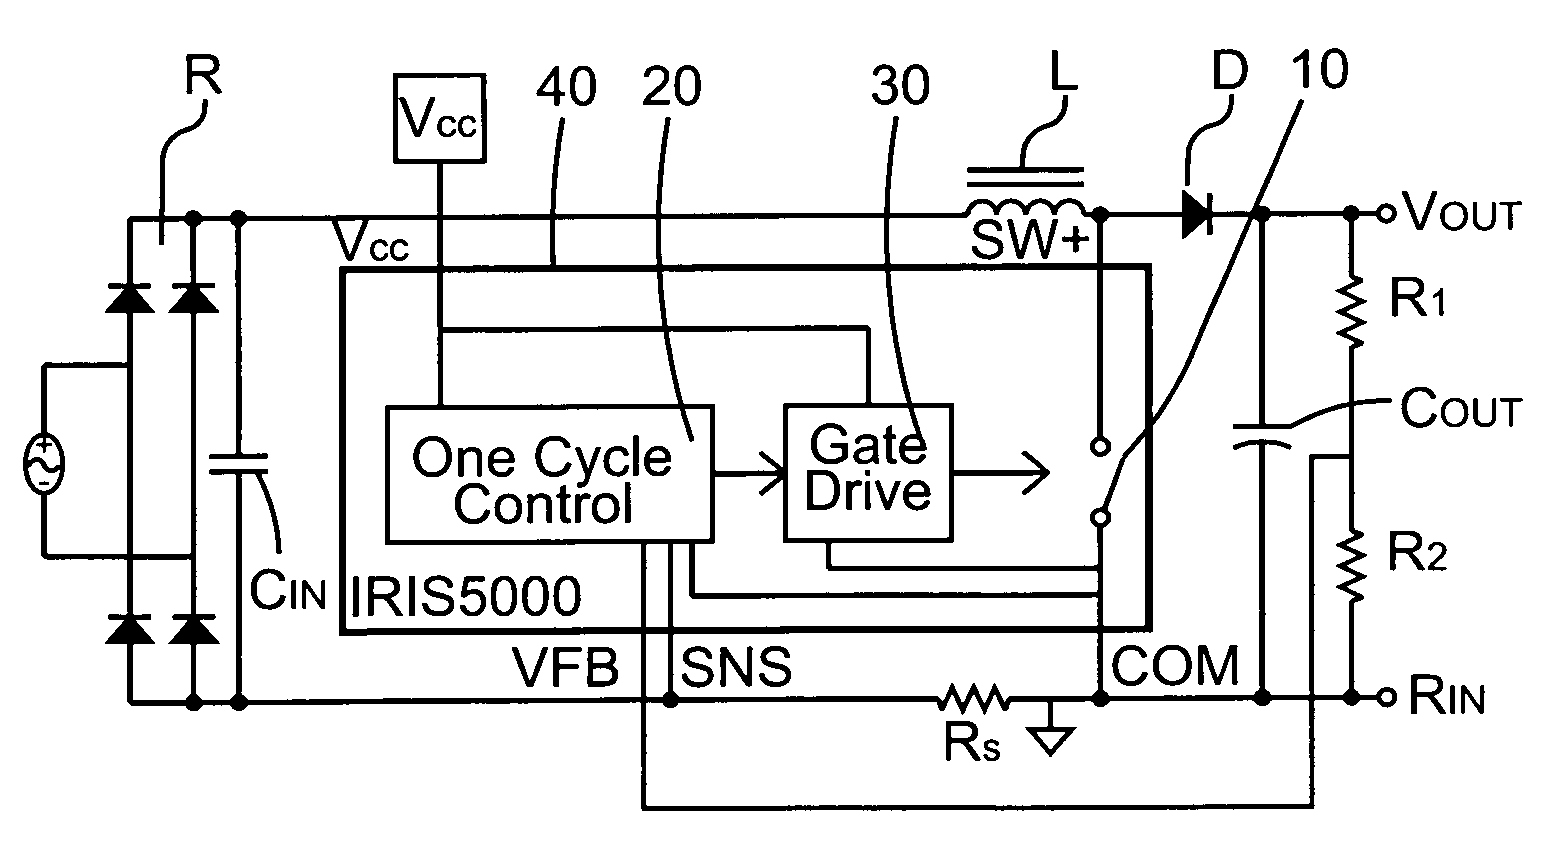 One cycle control PFC boost converter integrated circuit with inrush current limiting, fan motor speed control and housekeeping power supply controller